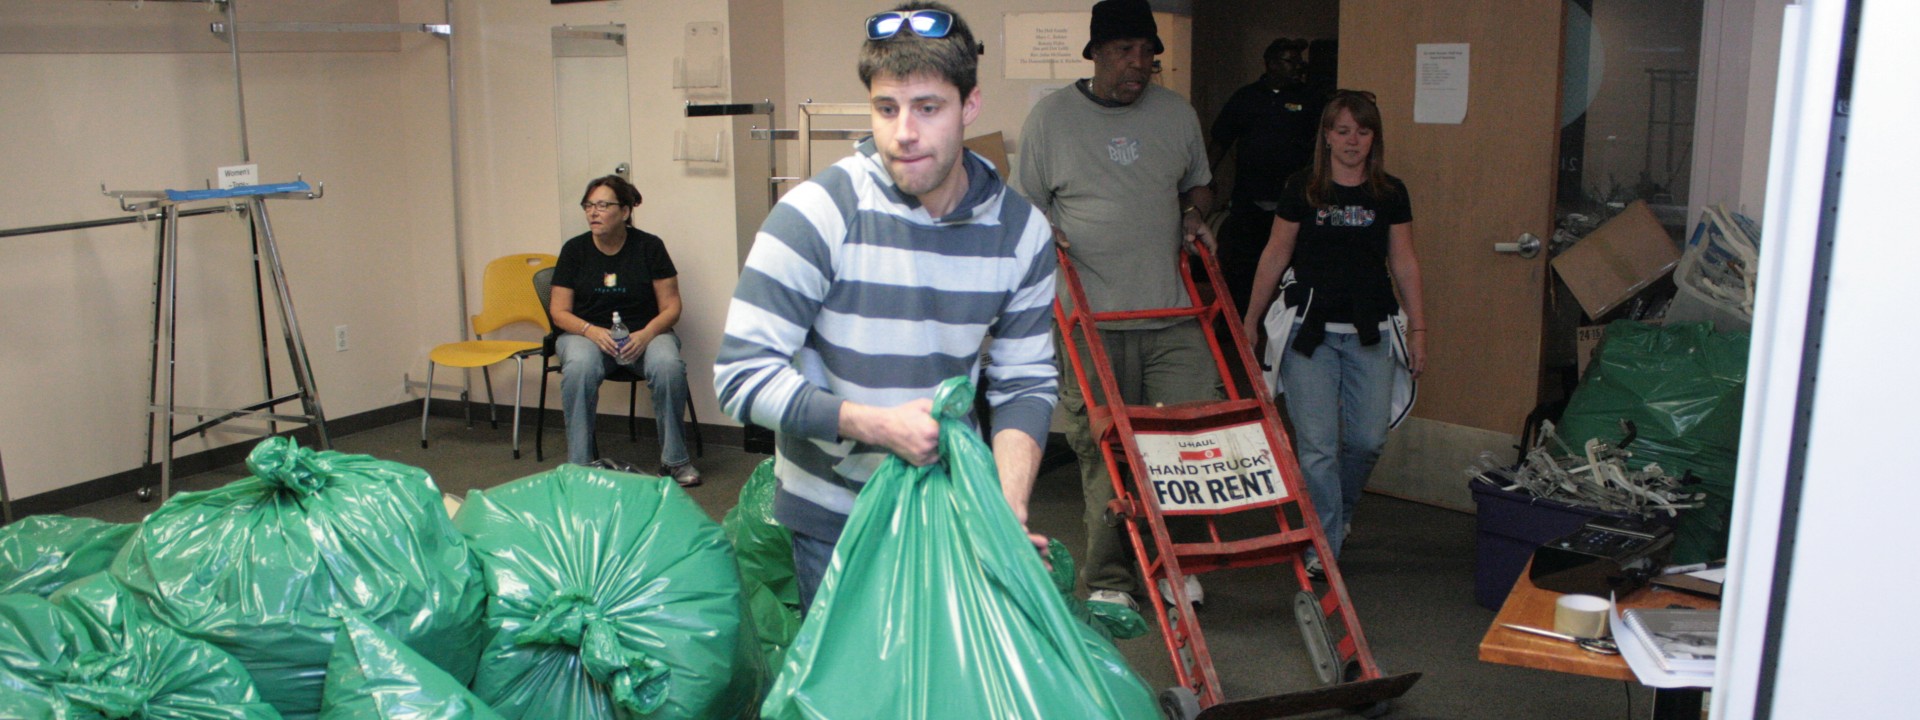 Corporate volunteers help during a clean up day